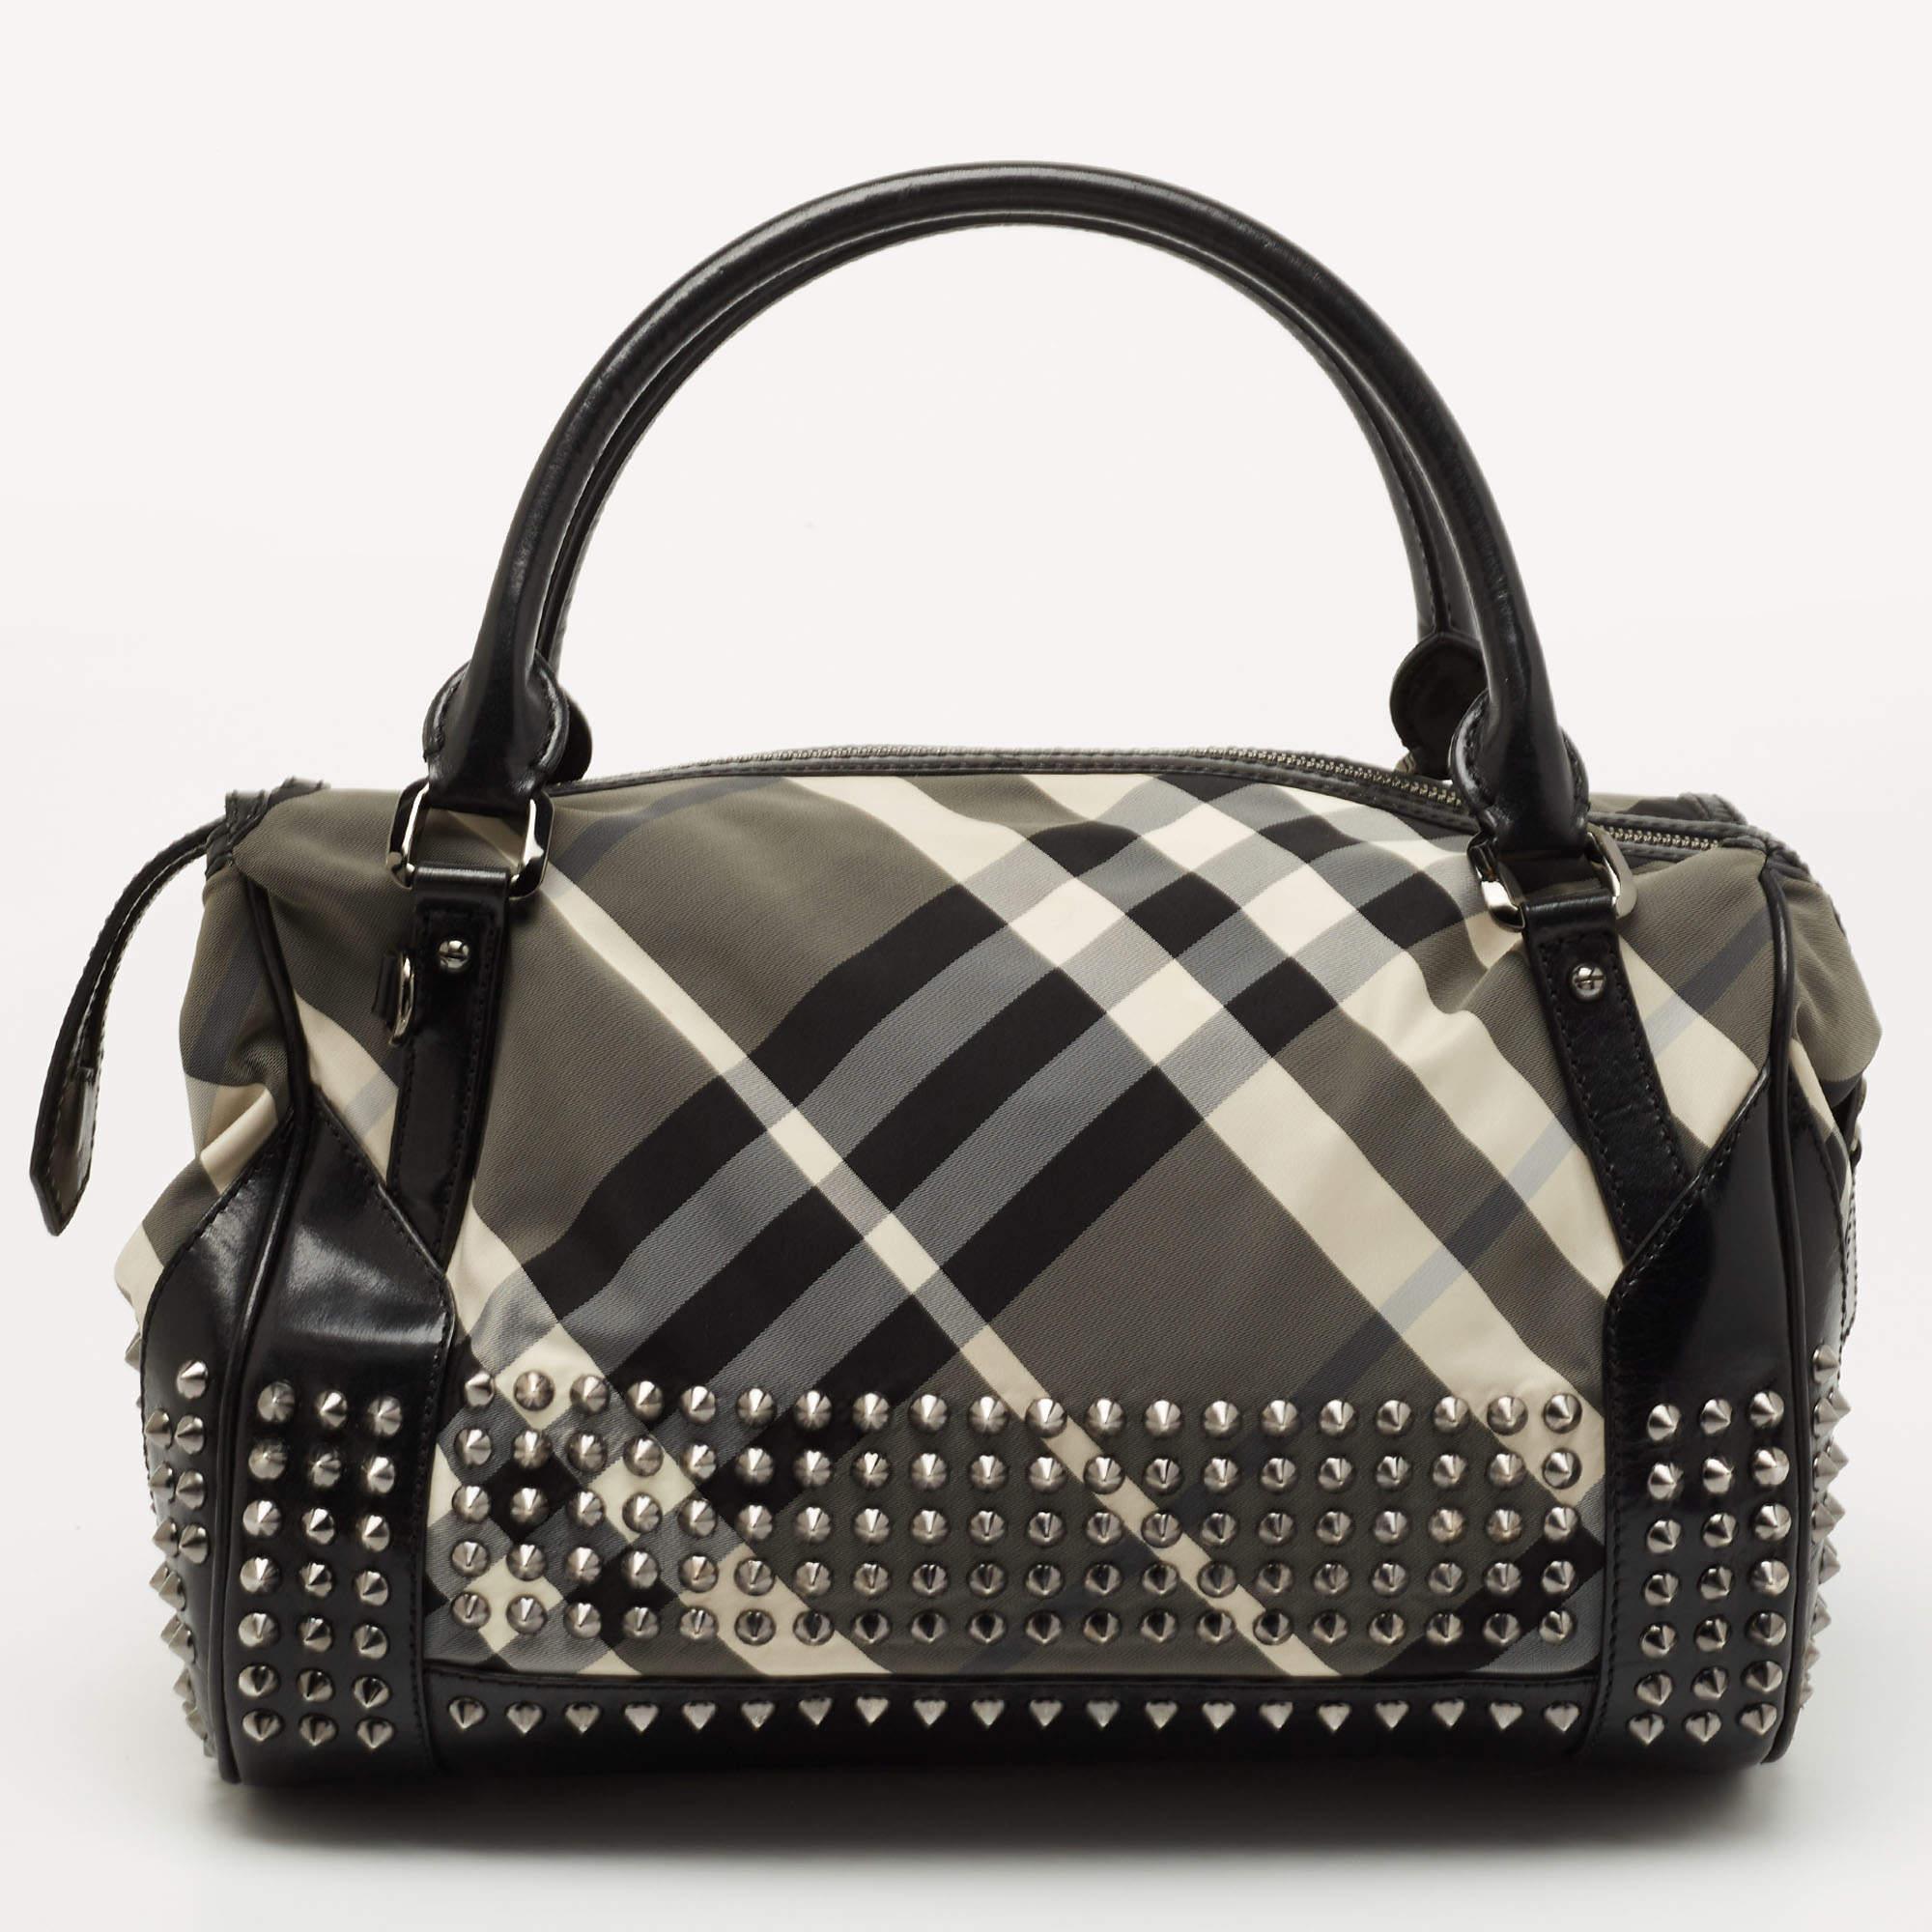 Handbags are more than just instruments to carry one's essentials. They tell a woman's sense of style, and the better the bag, the more confidence she gets when she holds it. This designer bag is meticulously made from luxe materials and has a